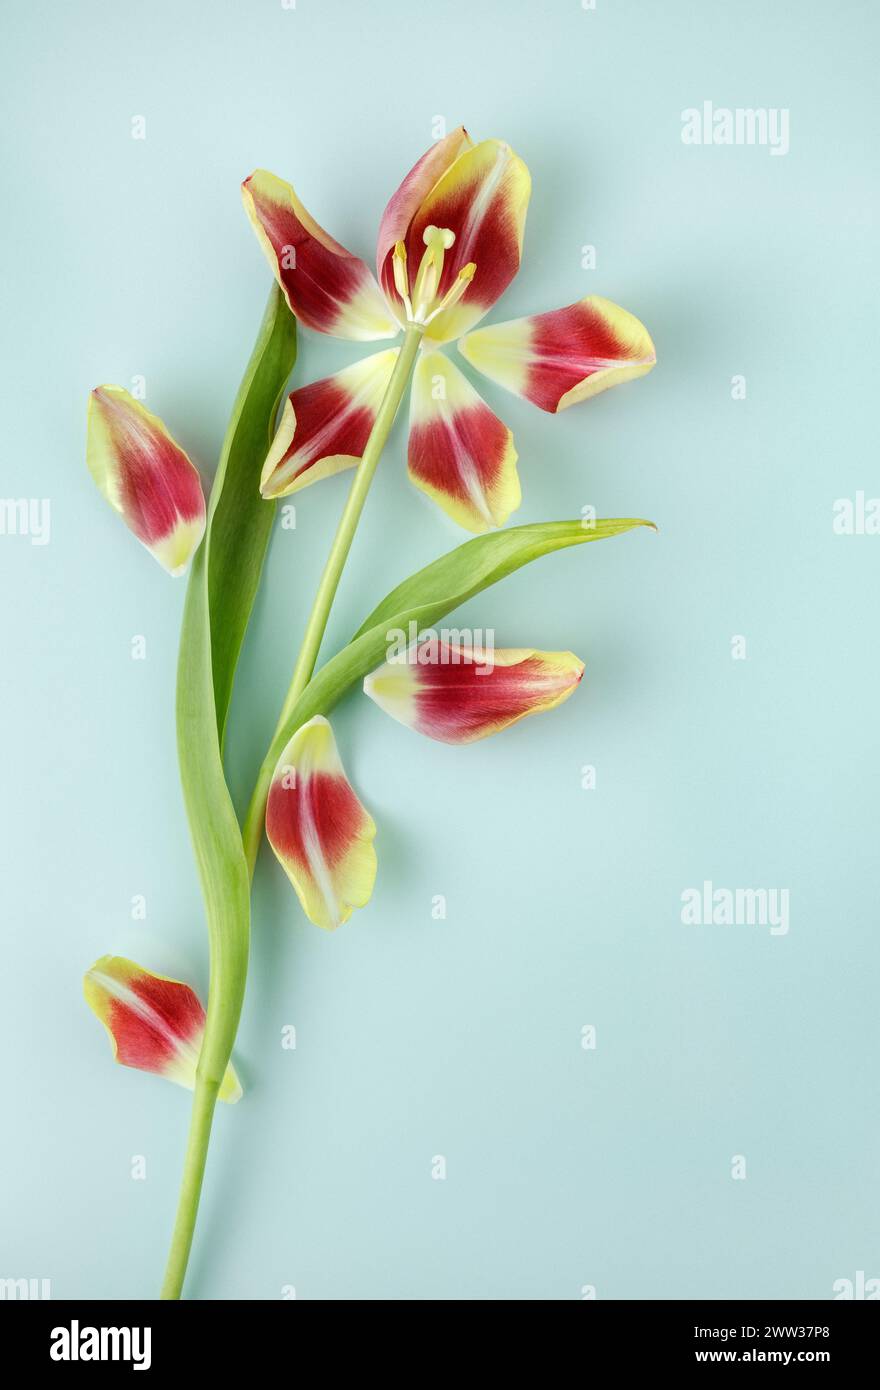 Single red and yellow tulip with separated petals Stock Photo